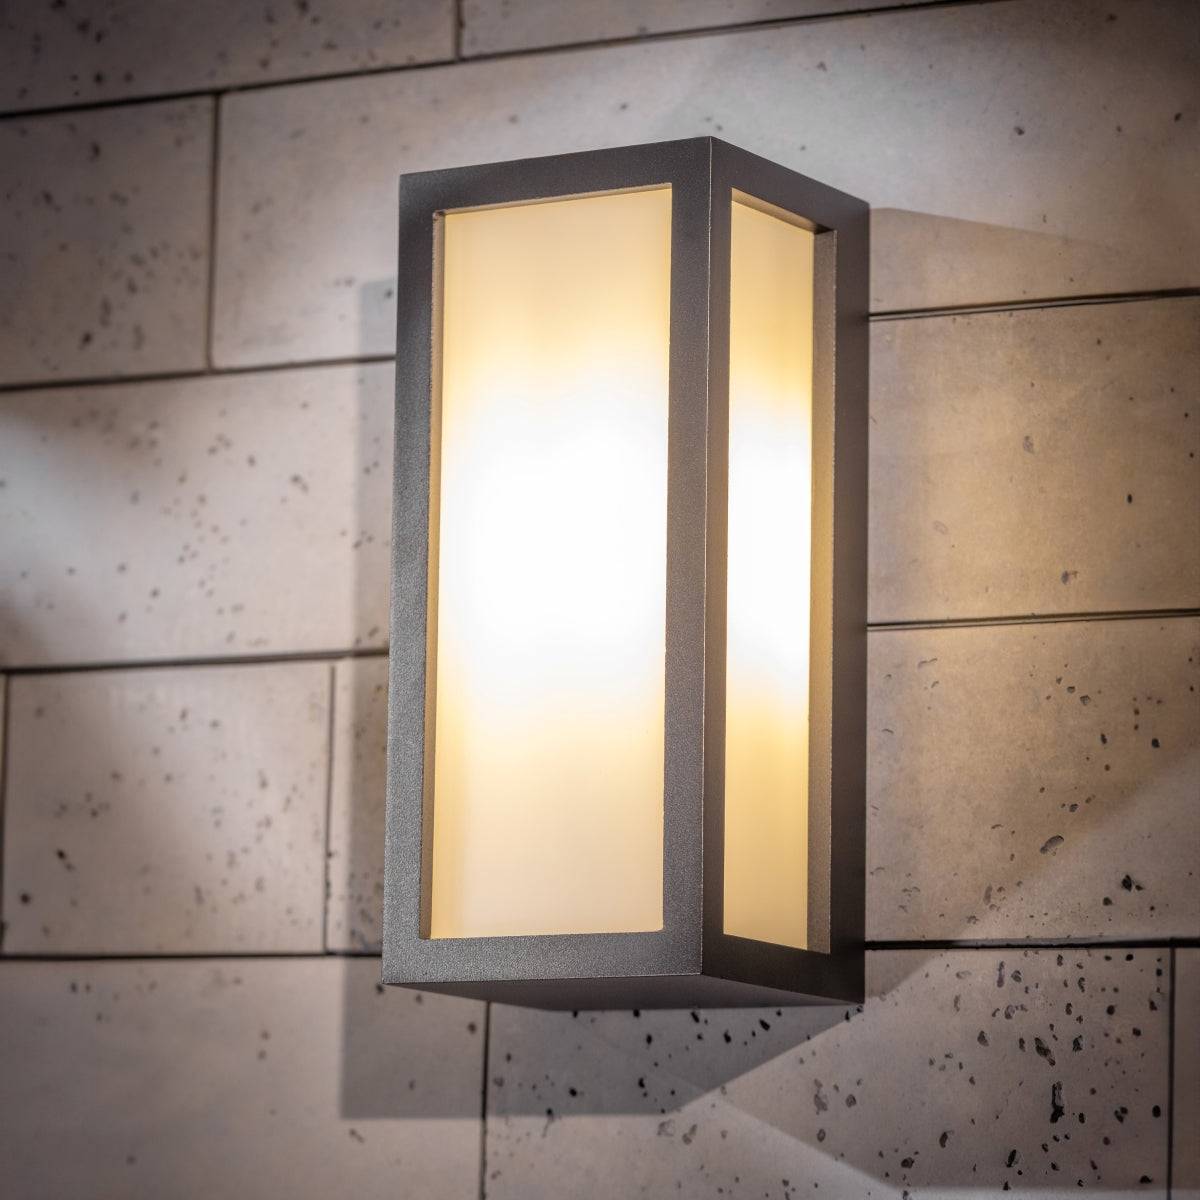 If you’re looking for a modern take on a traditional outdoor wall light, this black aluminium rectangle wall light is perfect for adding style and protection for your home. This classic design with a contemporary twist, styled with a metal rectangle shape and fitted with opal diffusers also contains an imposing black finish